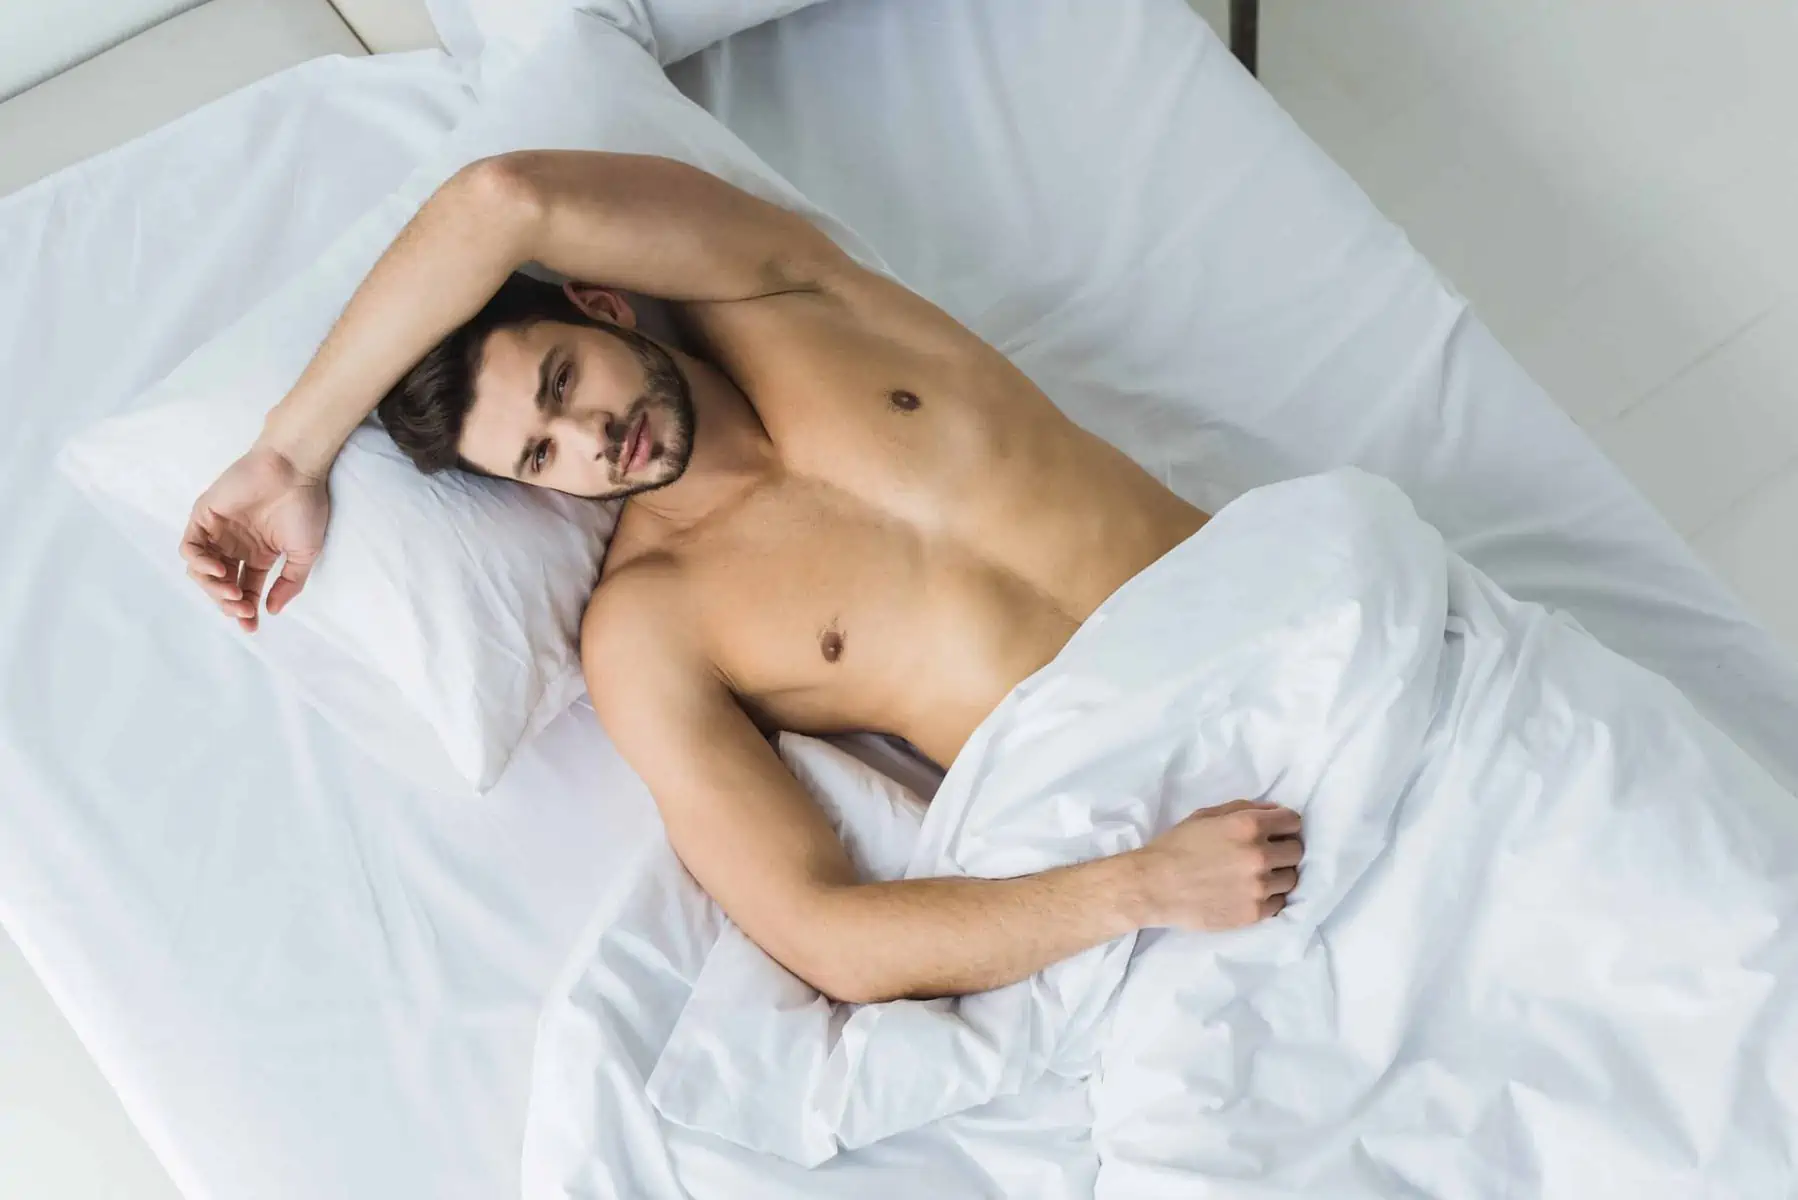 A shirtless man laying in a bed with white sheets